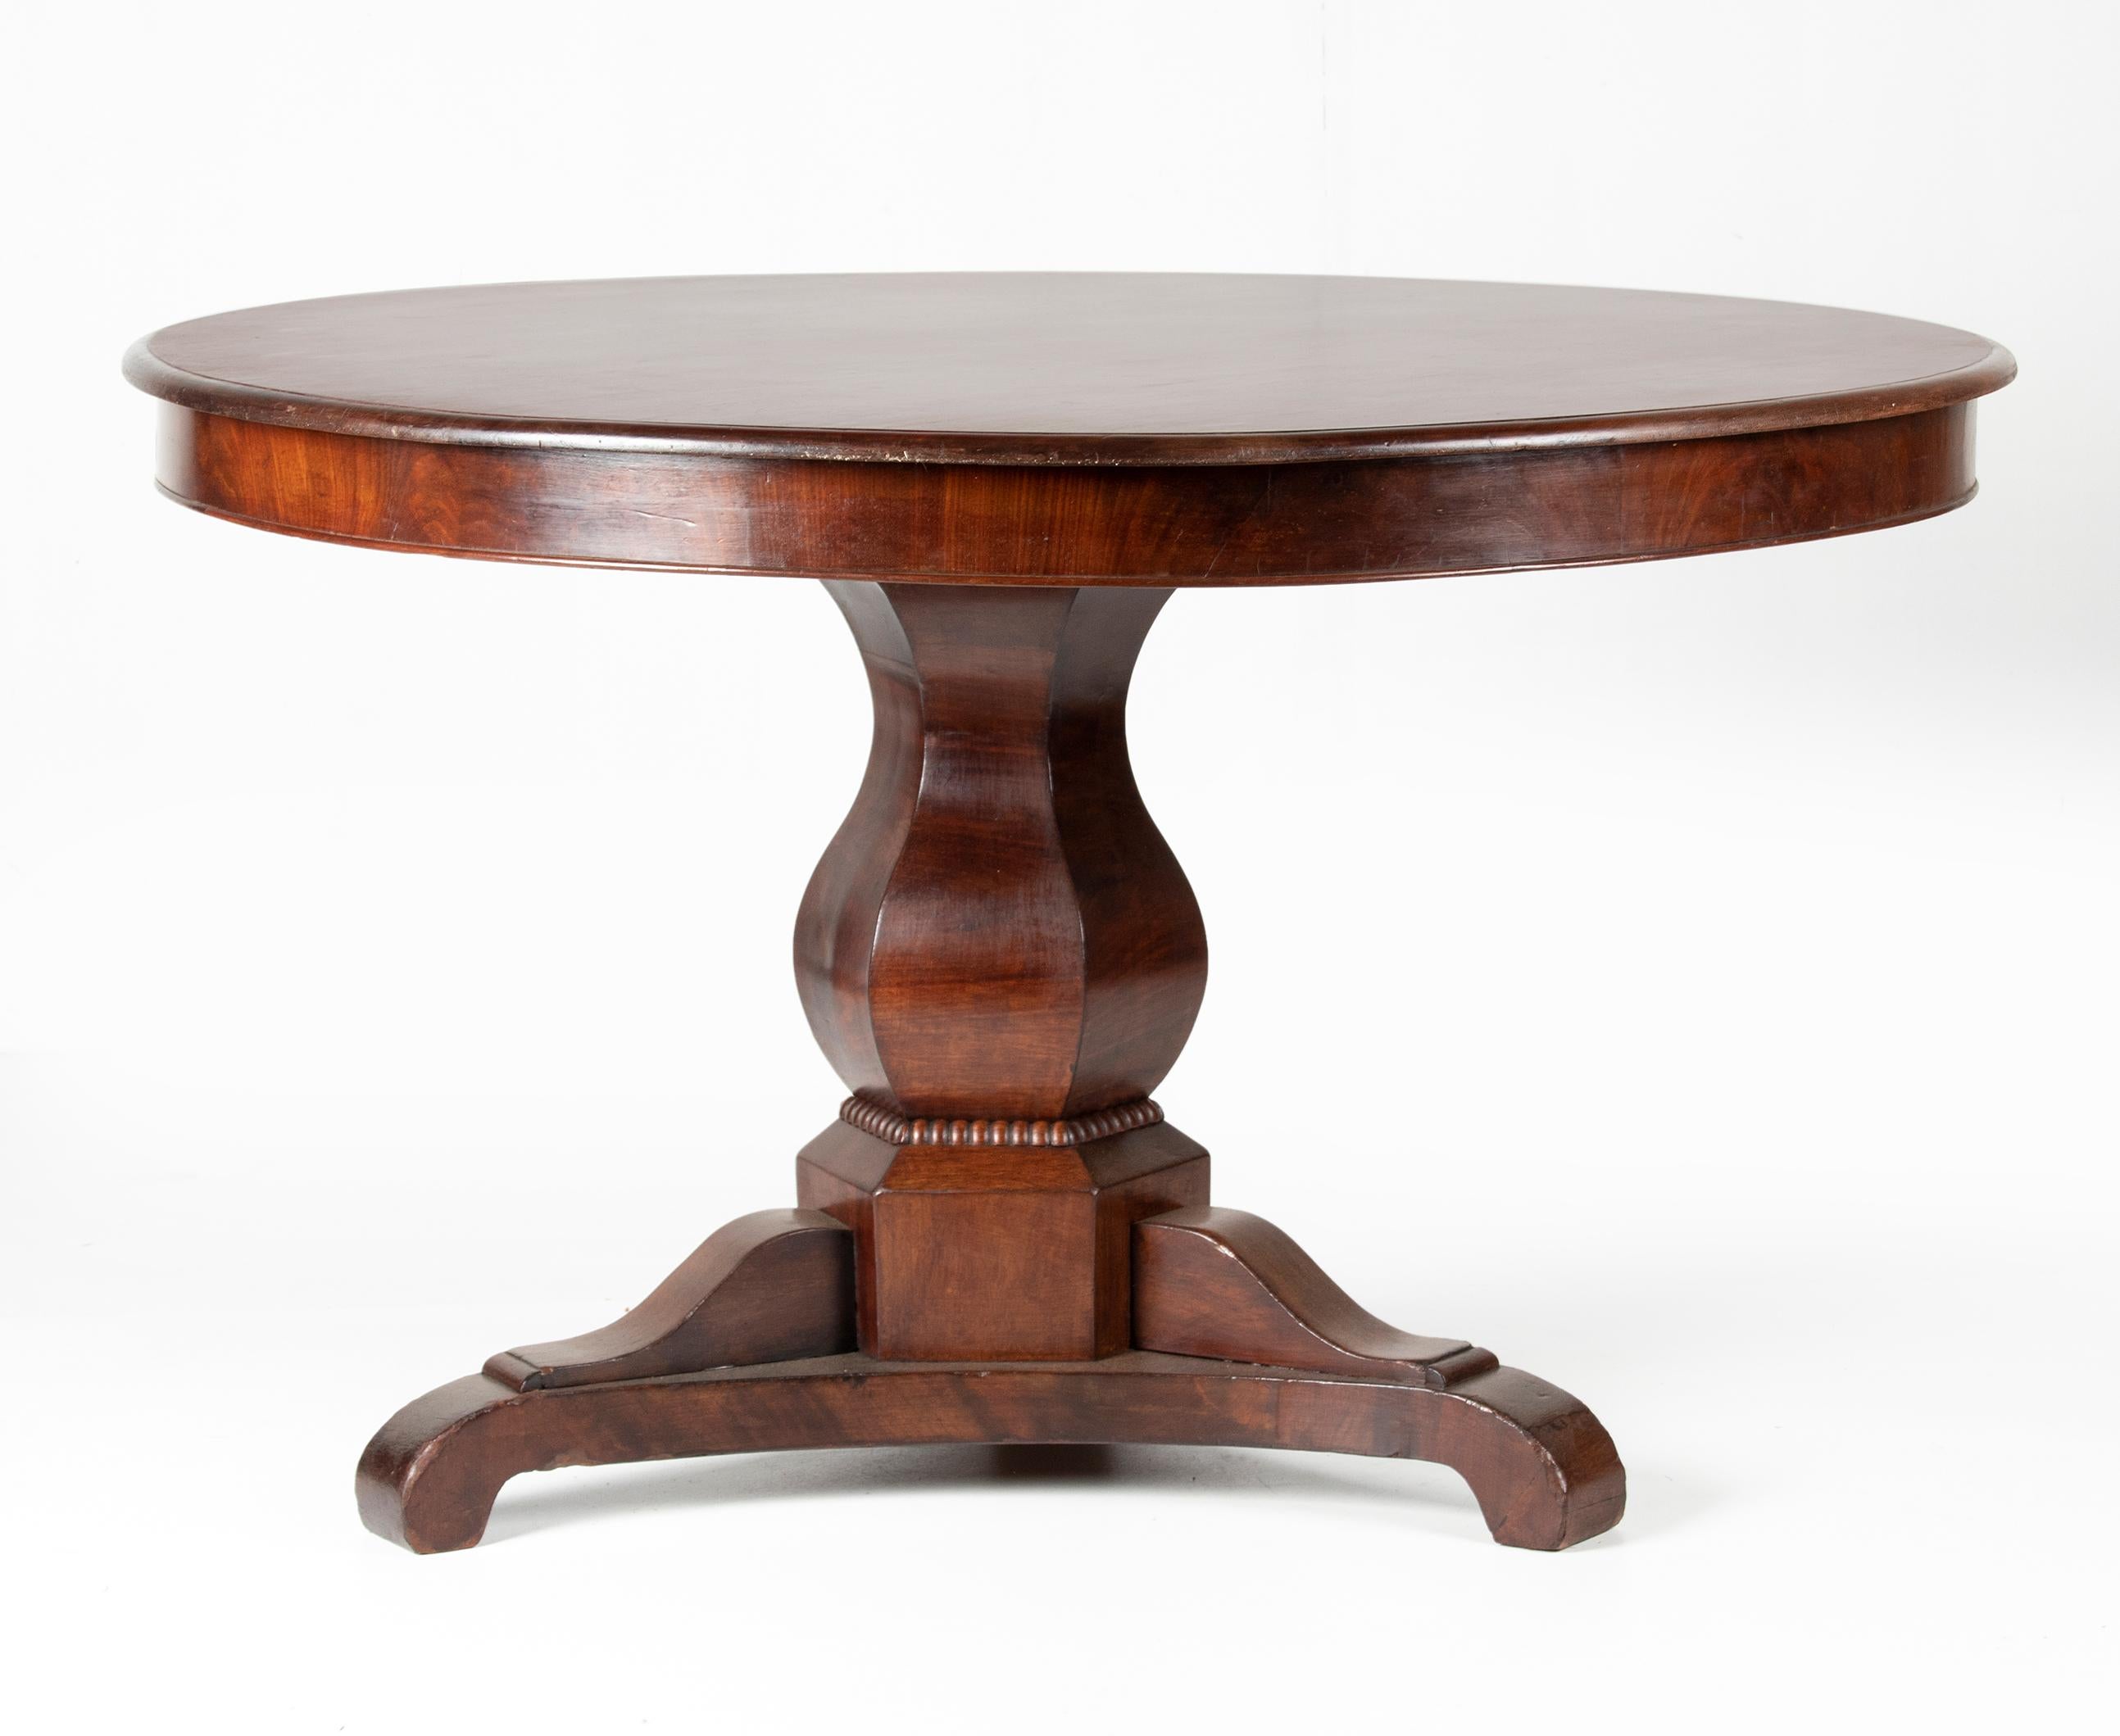 Beautiful antique round dining table, from France.
The base has sleek, angular shapes, the table is from circa 1870.
The table is stable and sturdy. The blade can be disassembled from the base quite easily.
Some signs of wear on the base,